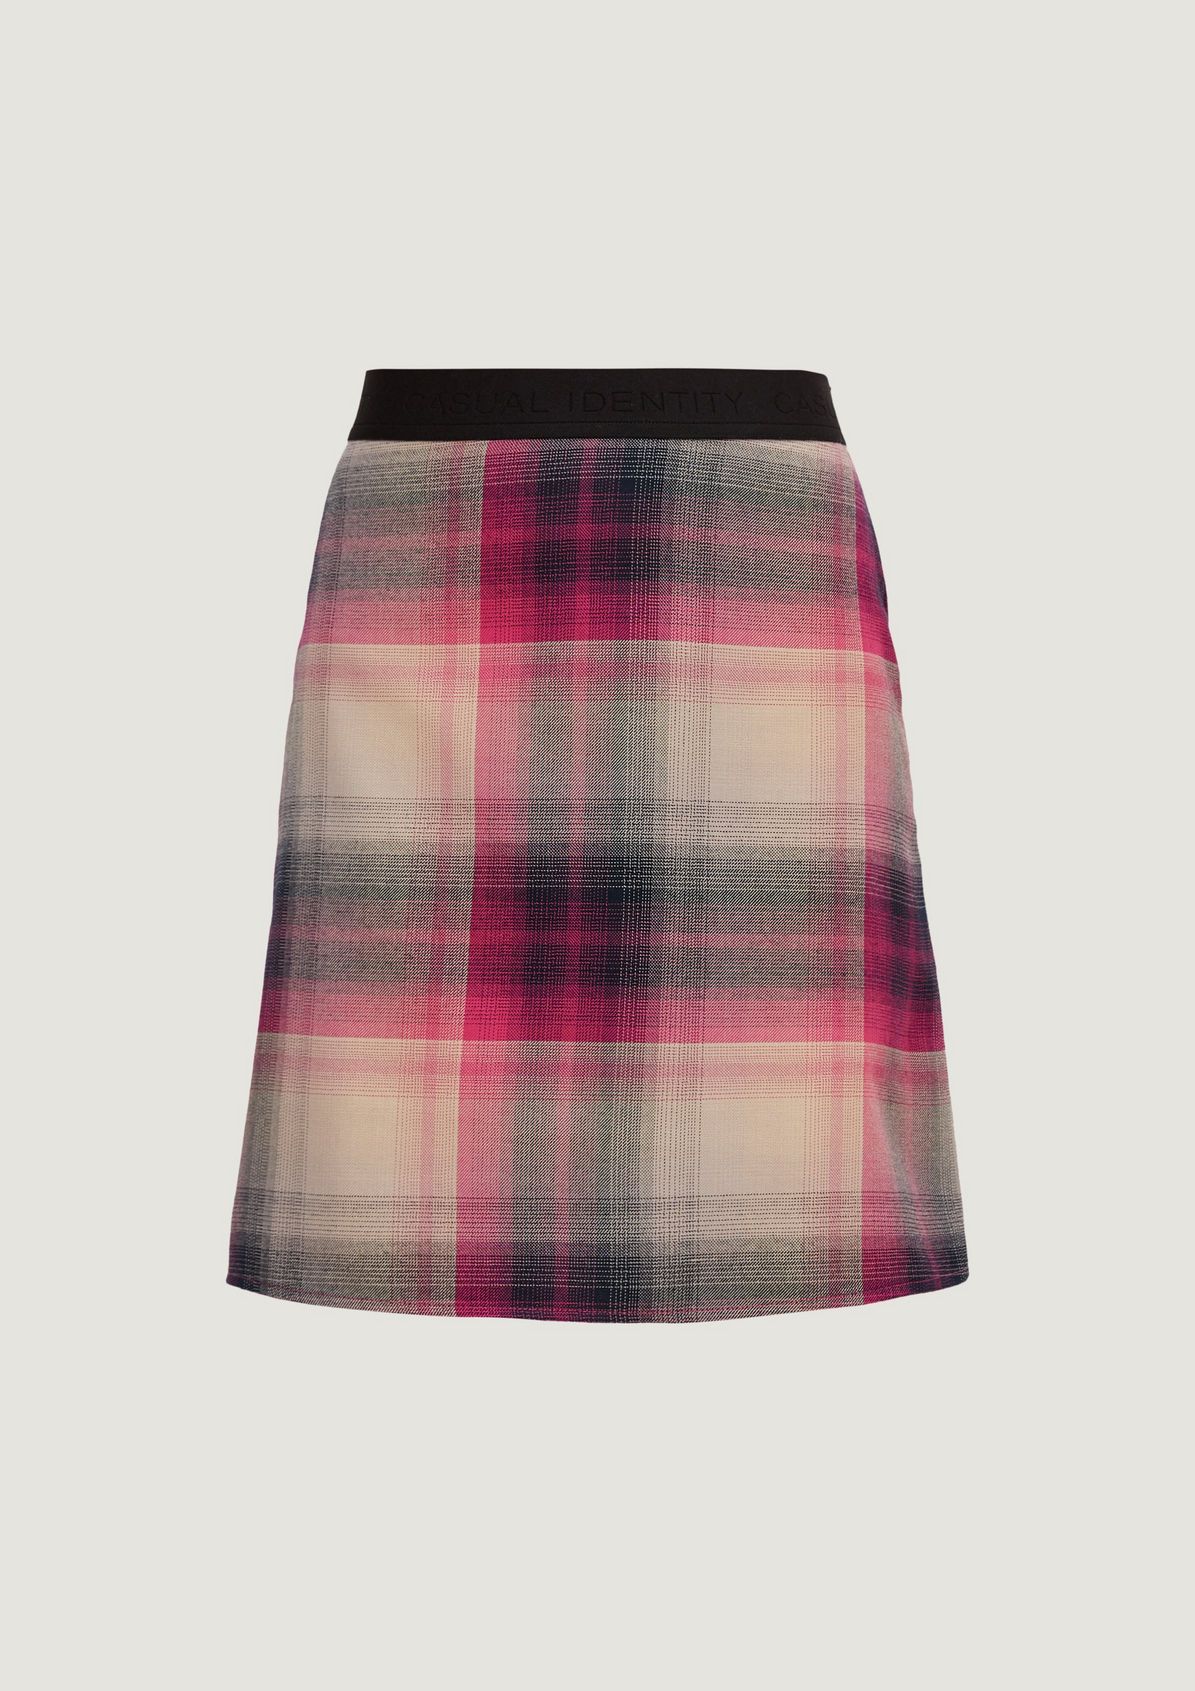 Skater skirt in a check design from comma